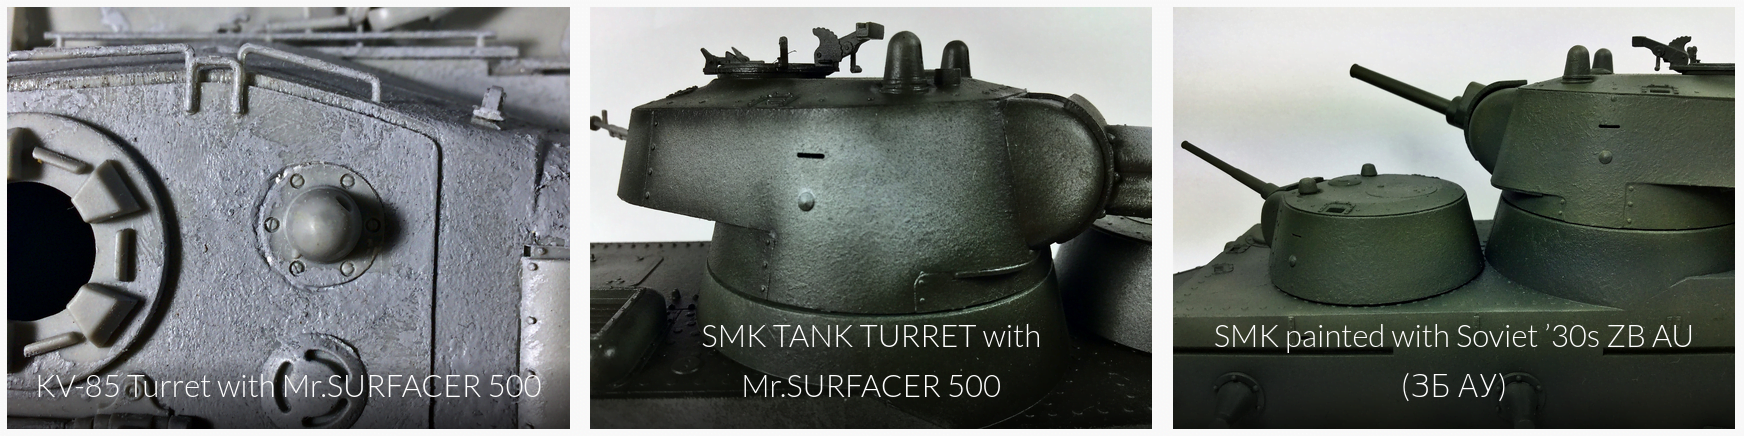 KV-85 and SMK Tank texture using Mr.SURFACER 500 and REAL COLORS ZB AU